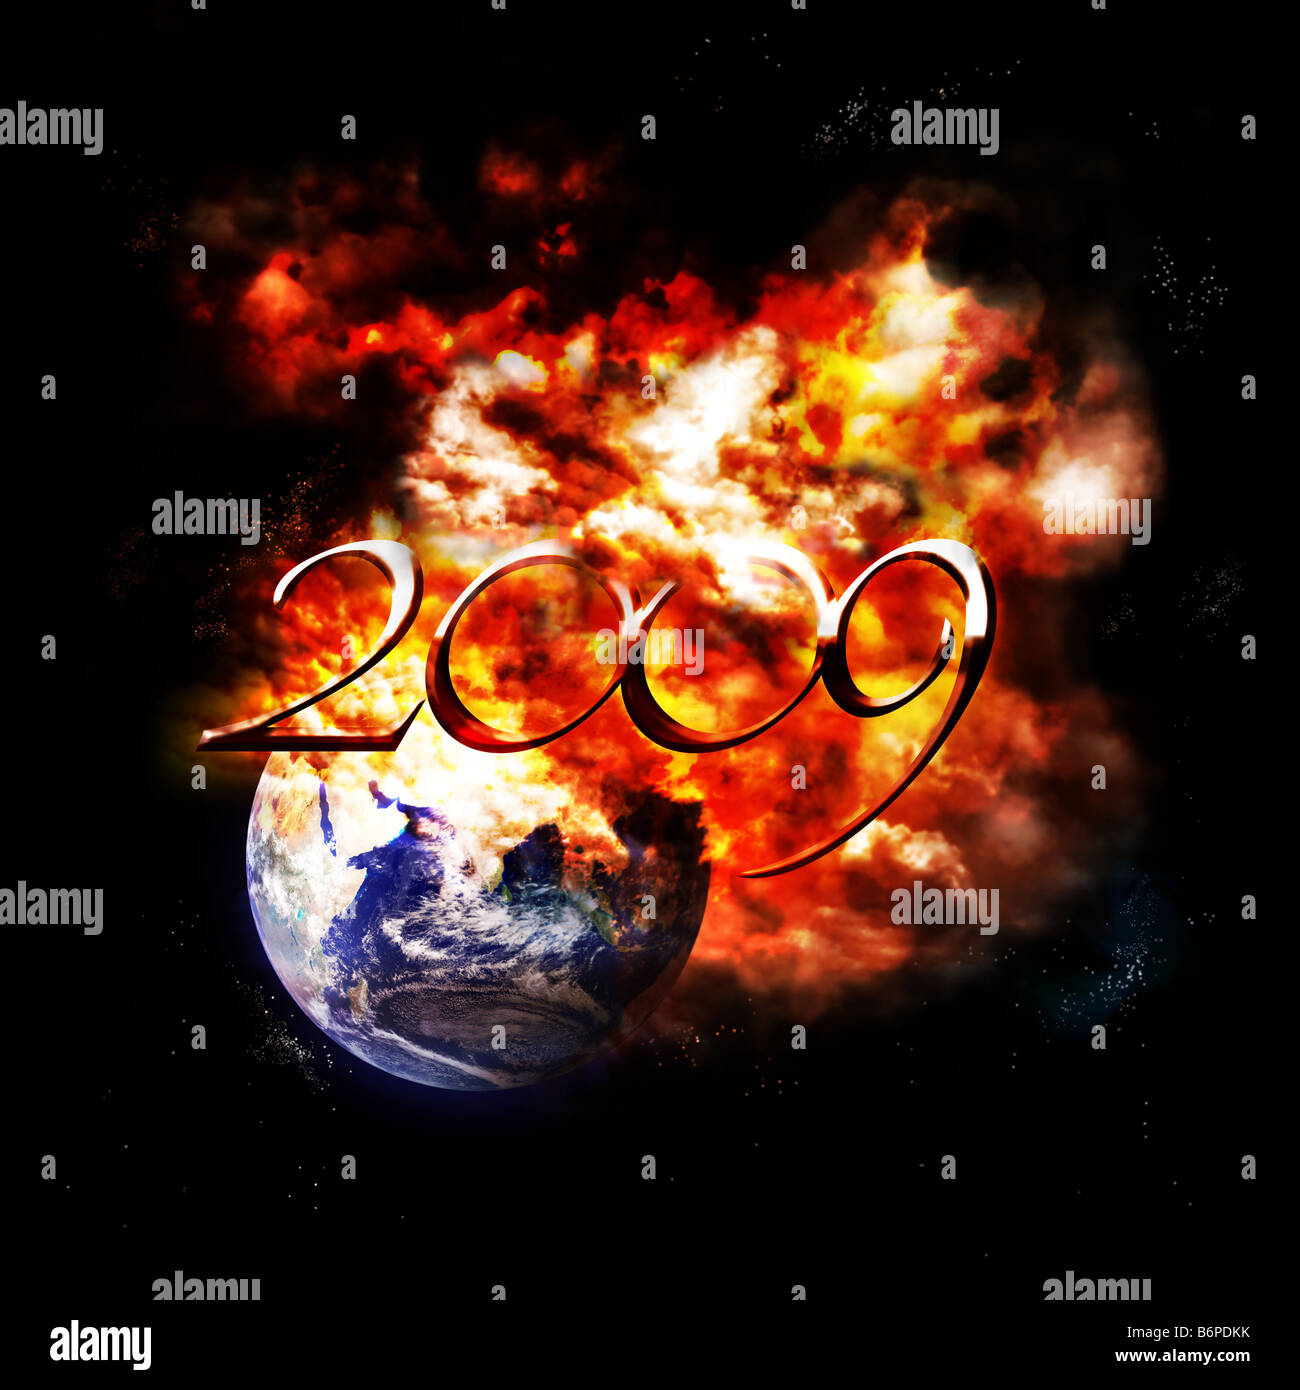 the year 2009 is comming soon Stock Photo